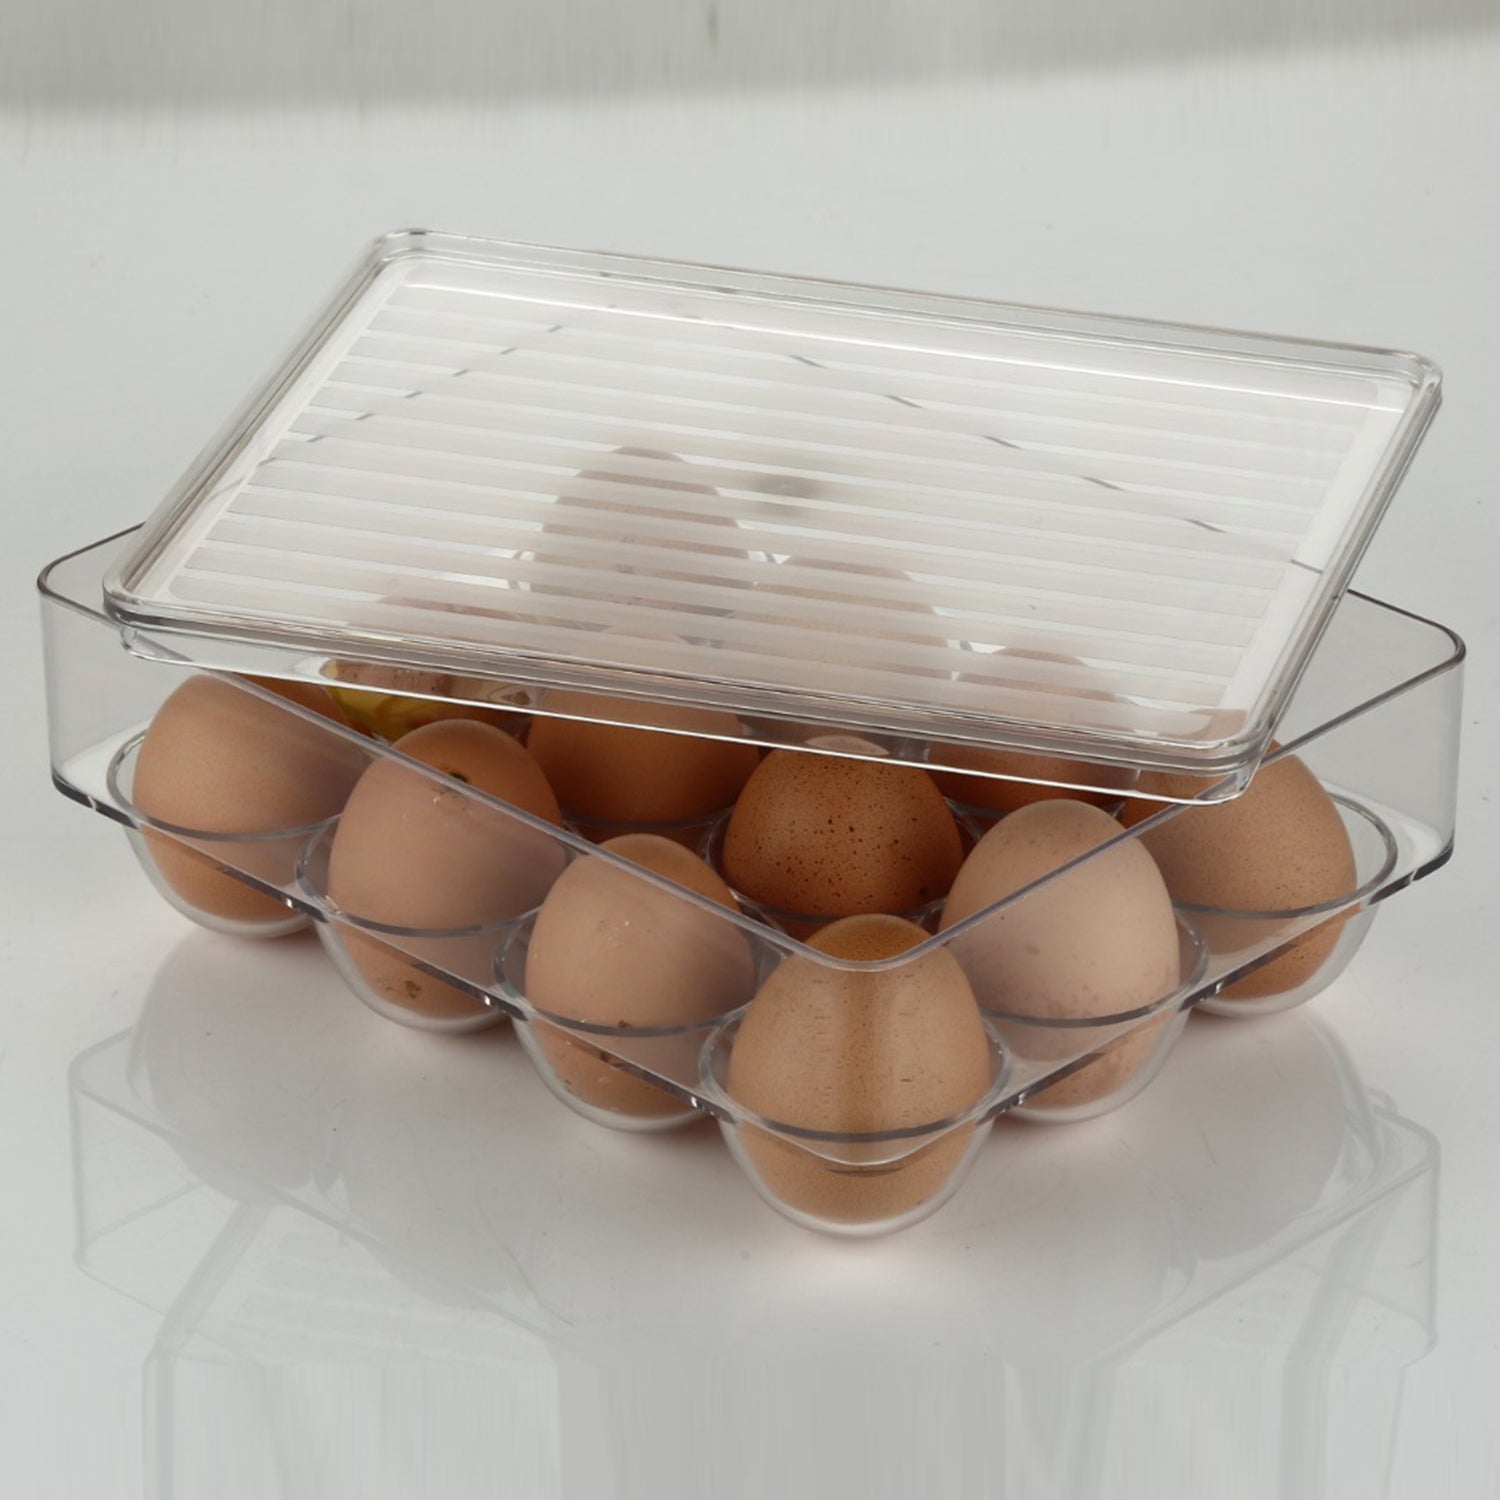 2794B 12 Cavity Egg Storage Box For Holding And Placing Eggs Easily And Firmly. DeoDap